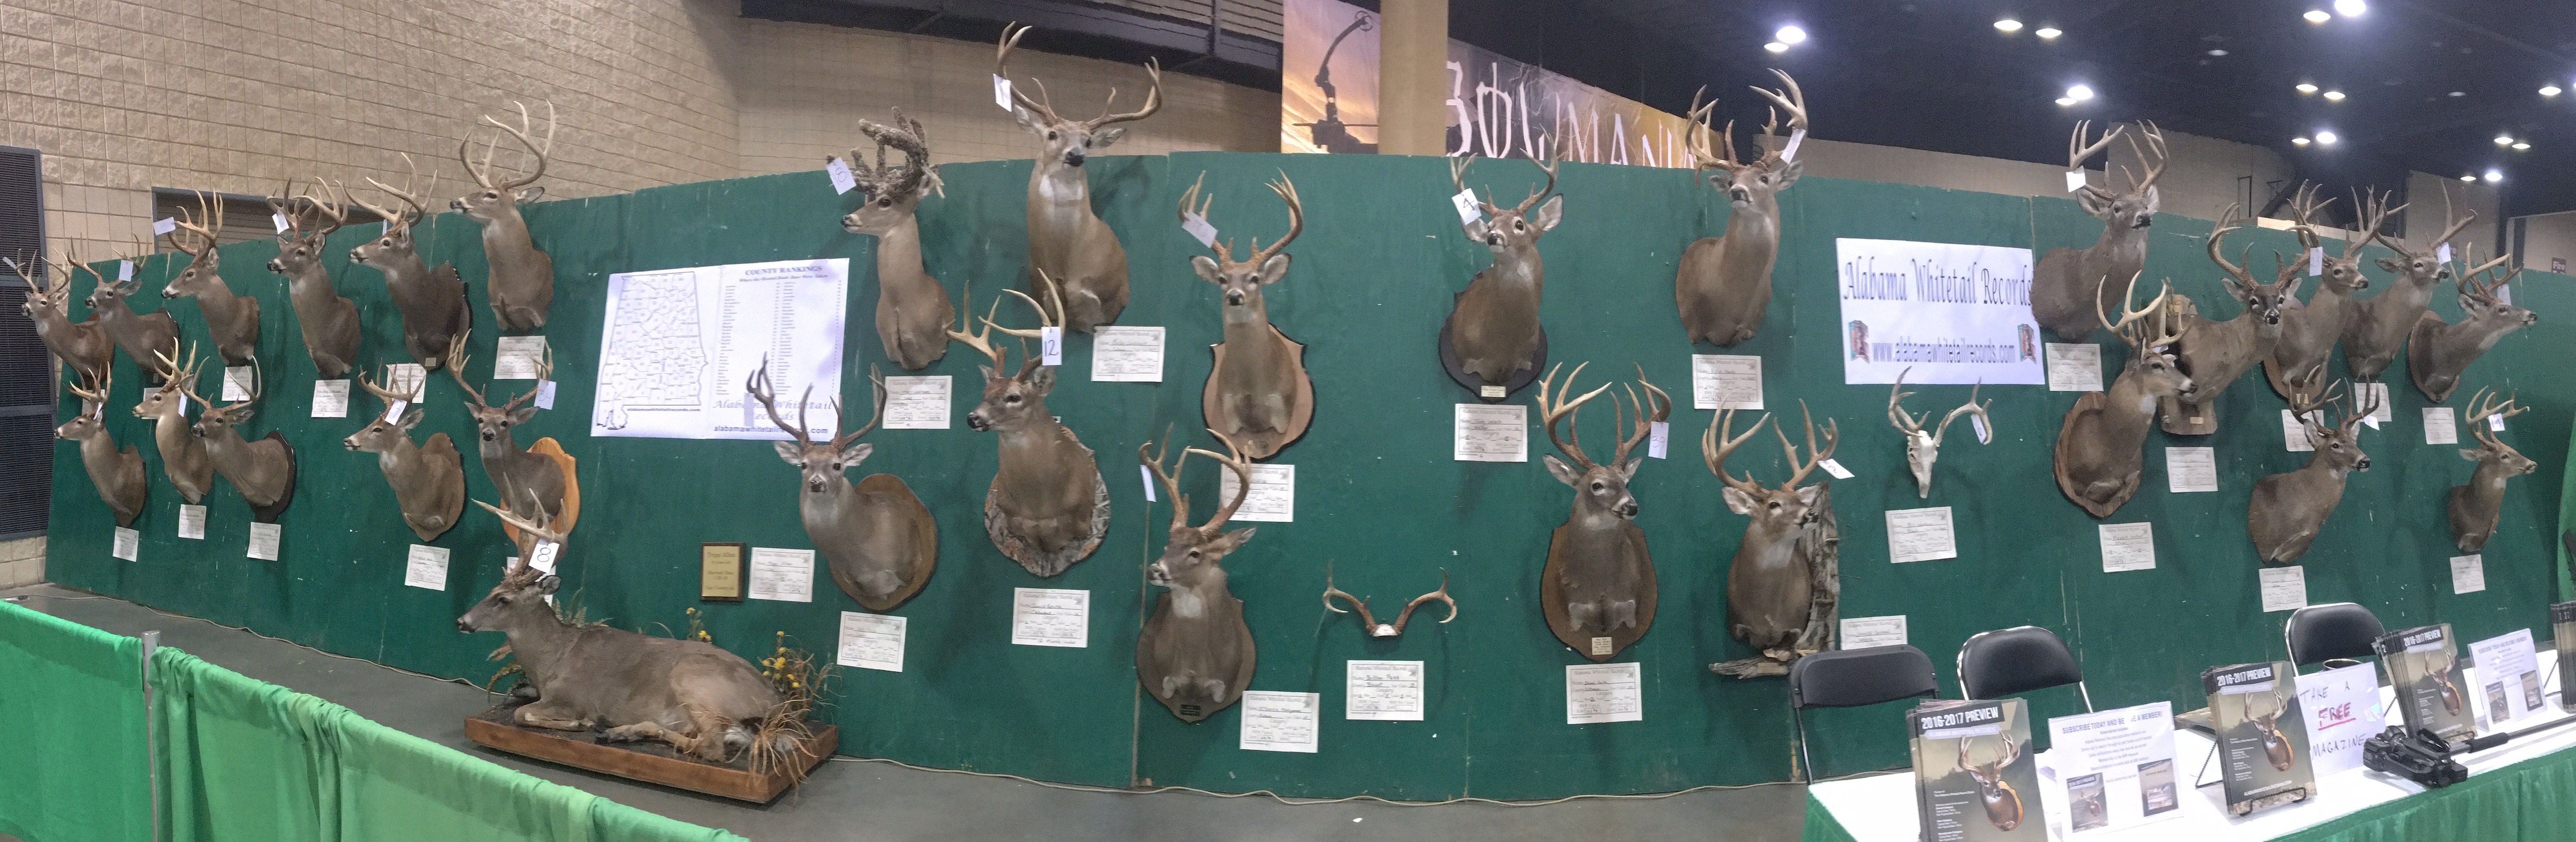 Big Buck Competition at the World Deer Expo